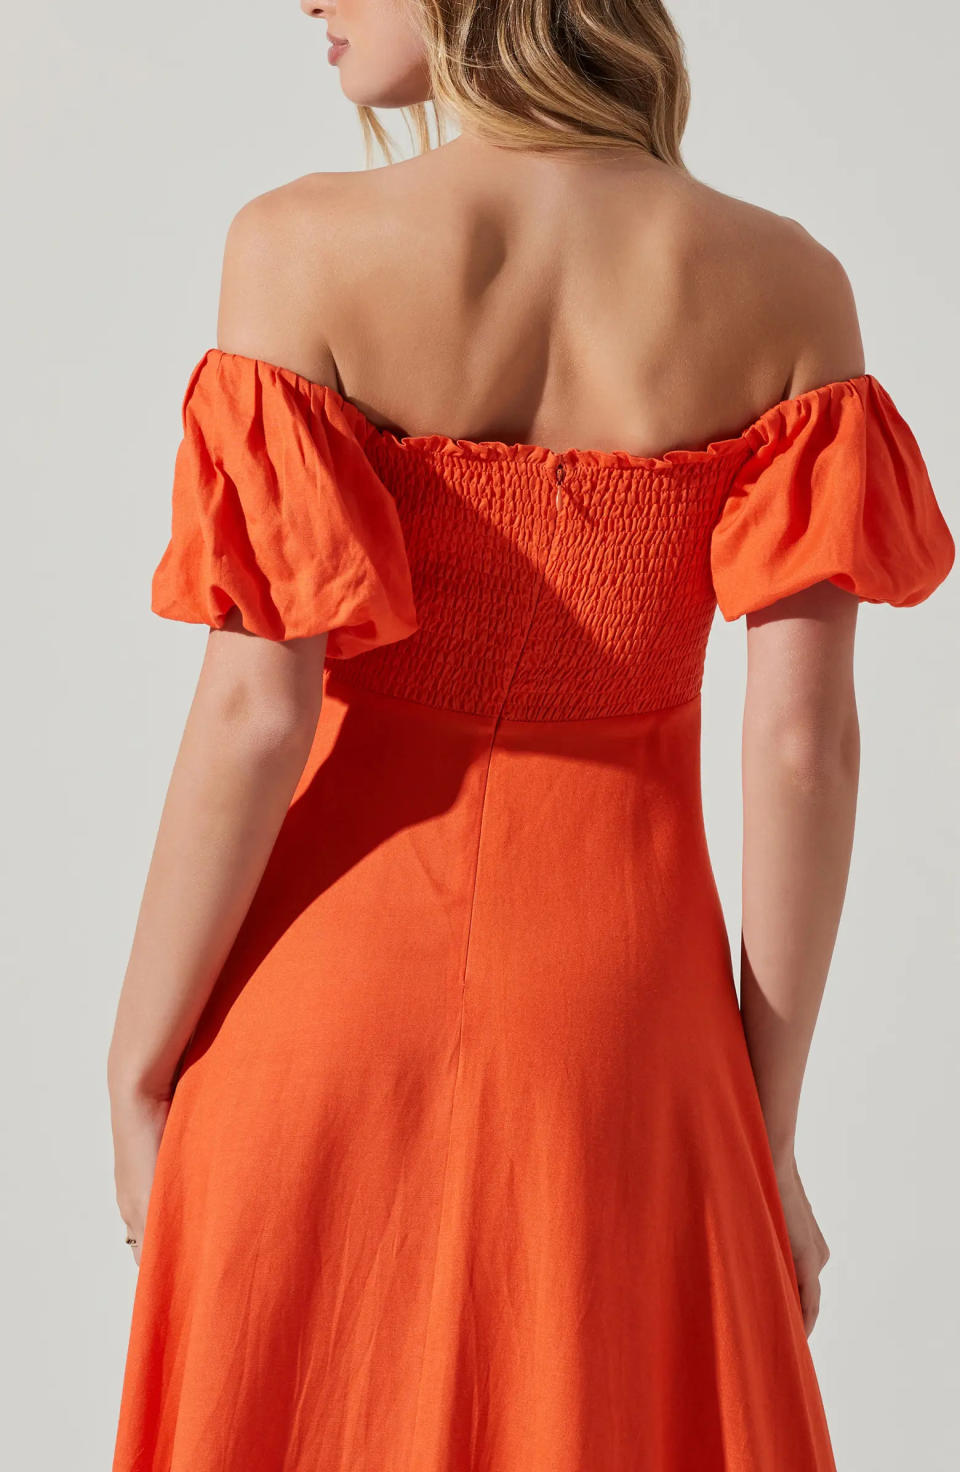 Also available in this spicy orange hue, you can brighten any party wearing this ASTR the Label dress.